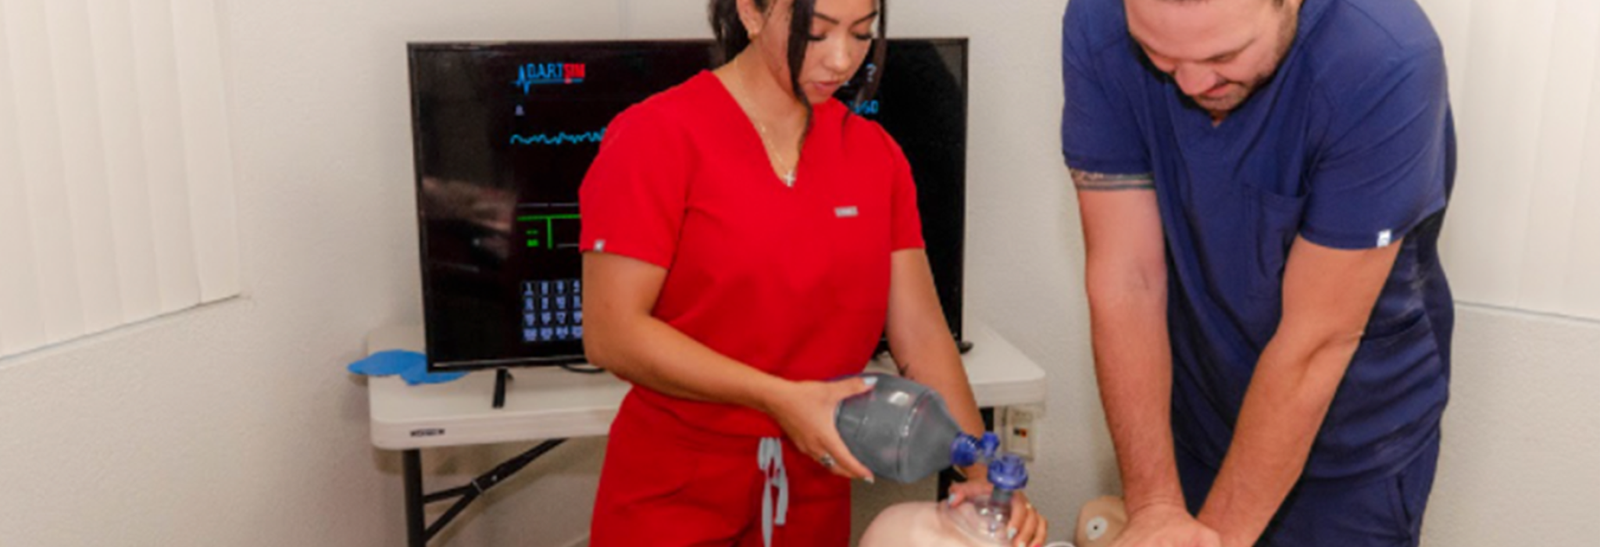 elite medical training enrolled students on how to be certified in basic life support